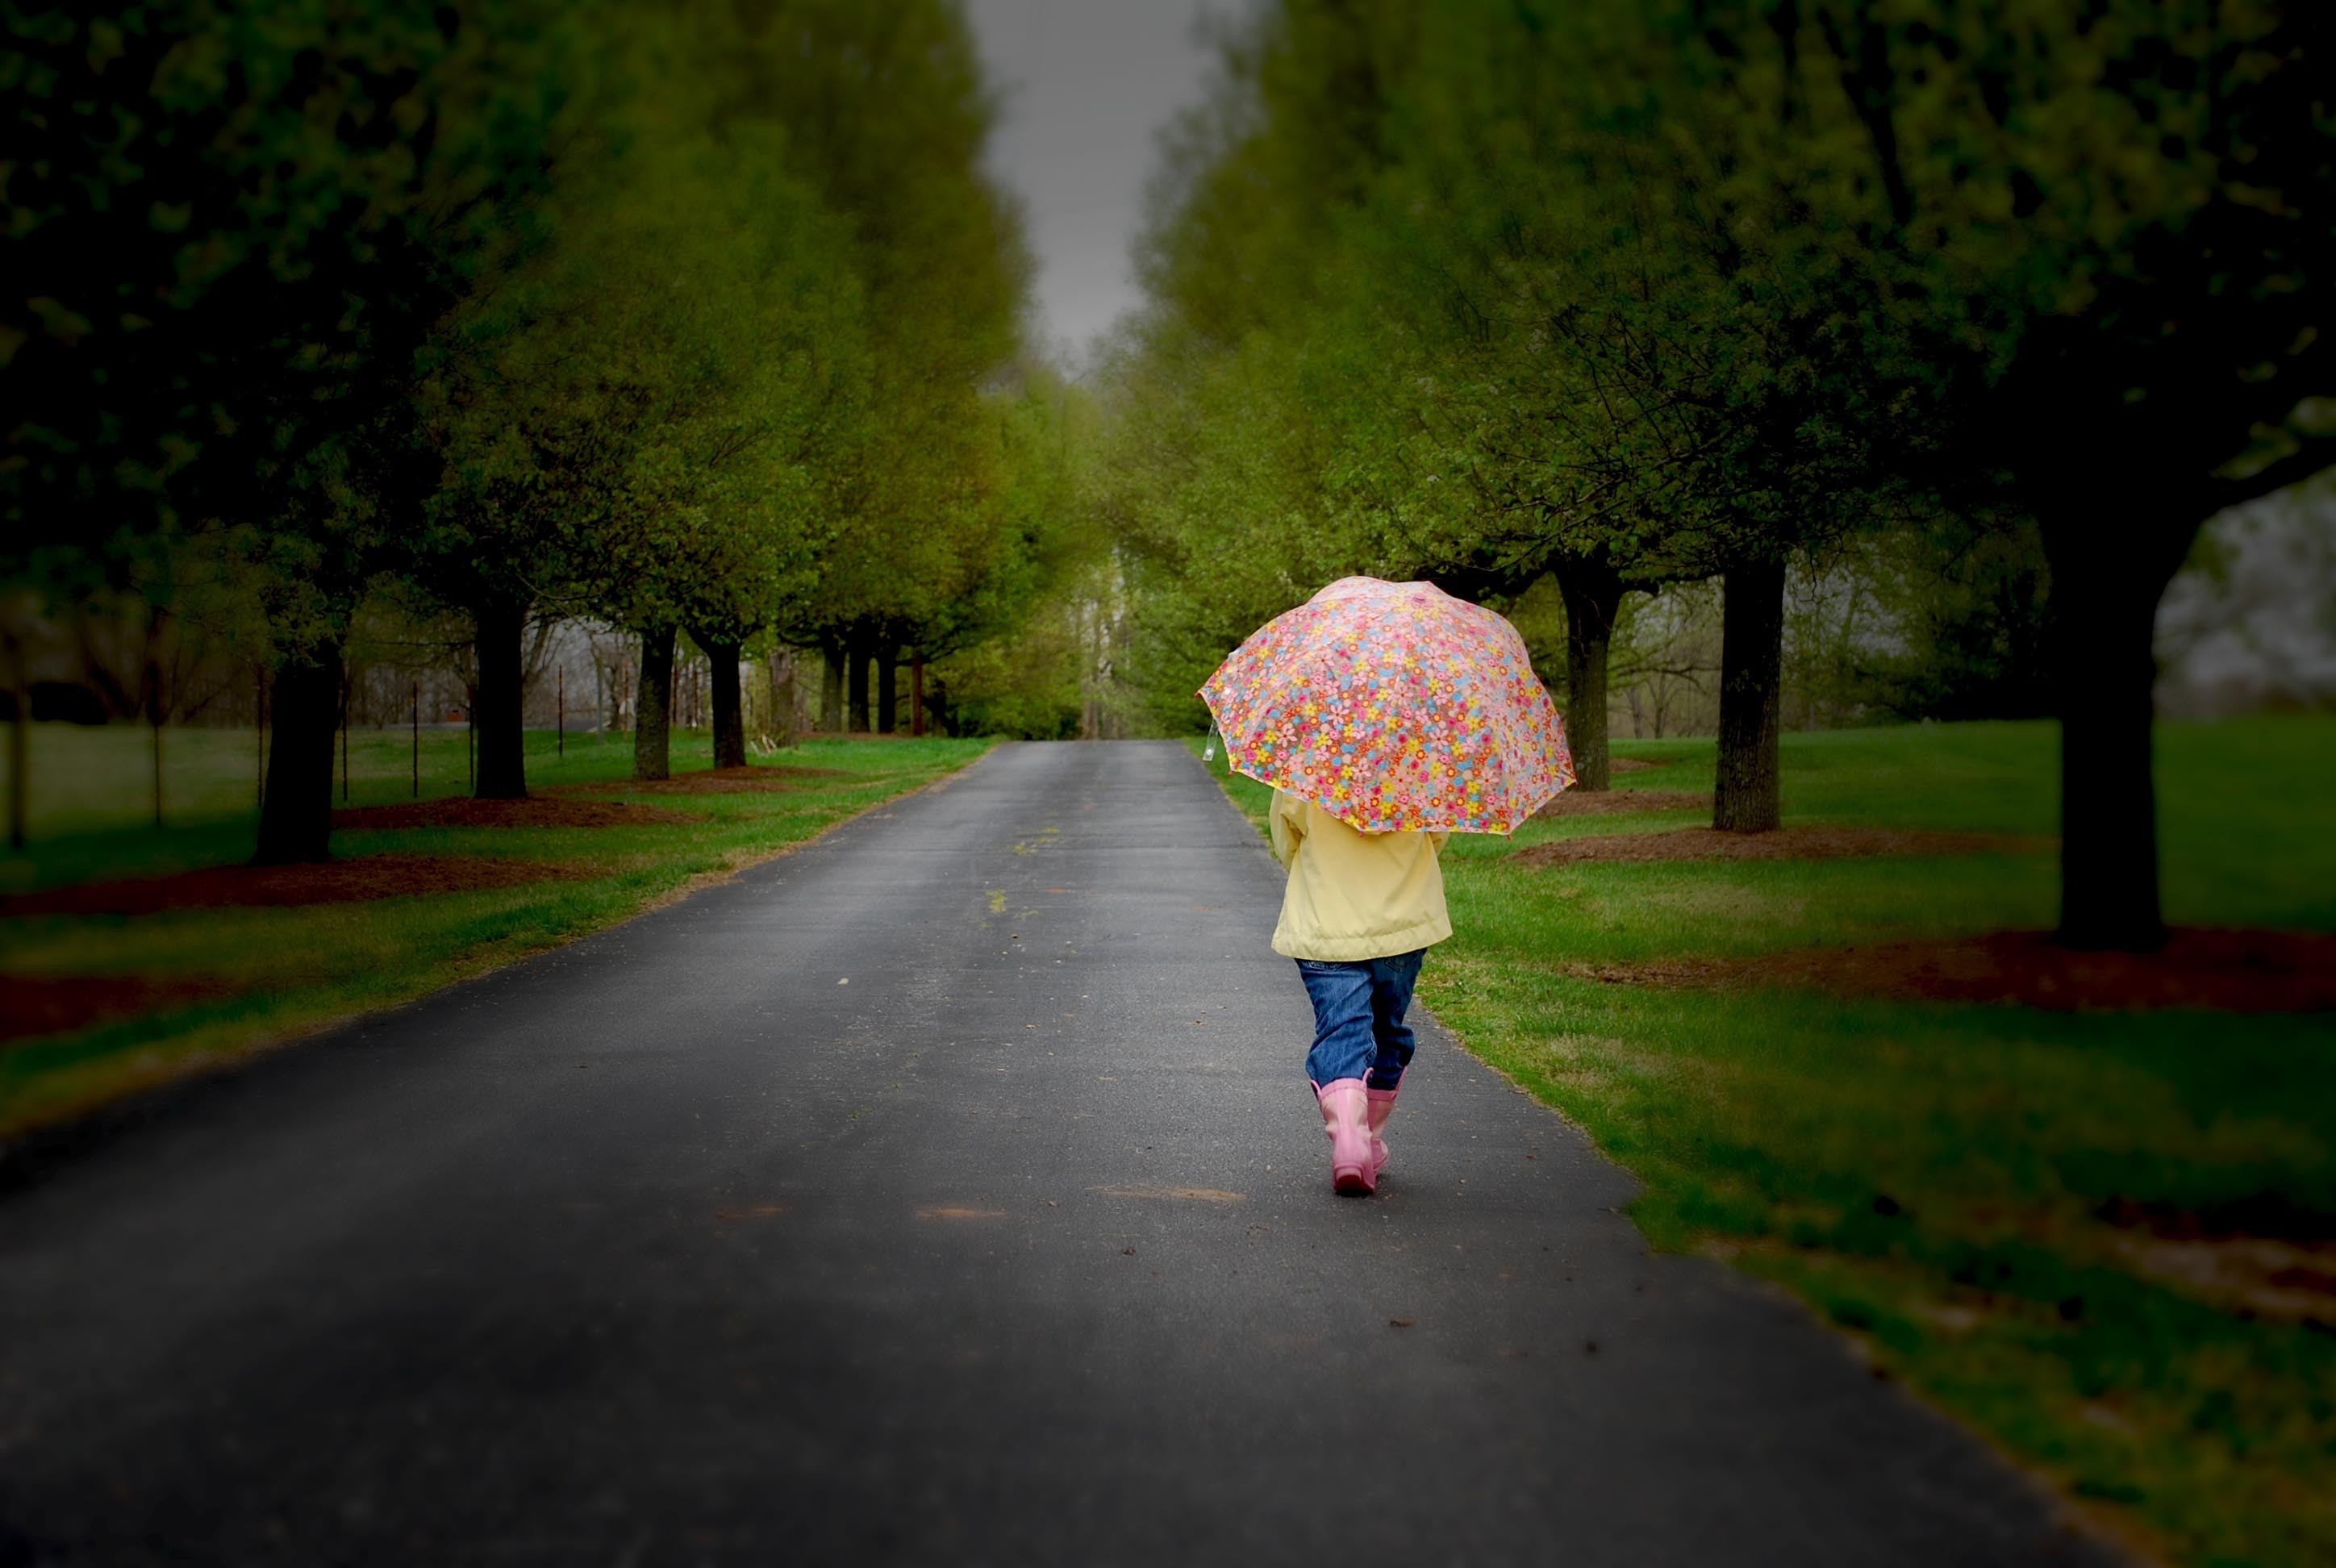 park, wood, miscellanea, miscellaneous, road, tree, stroll, overcast, mainly cloudy, umbrella iphone wallpaper